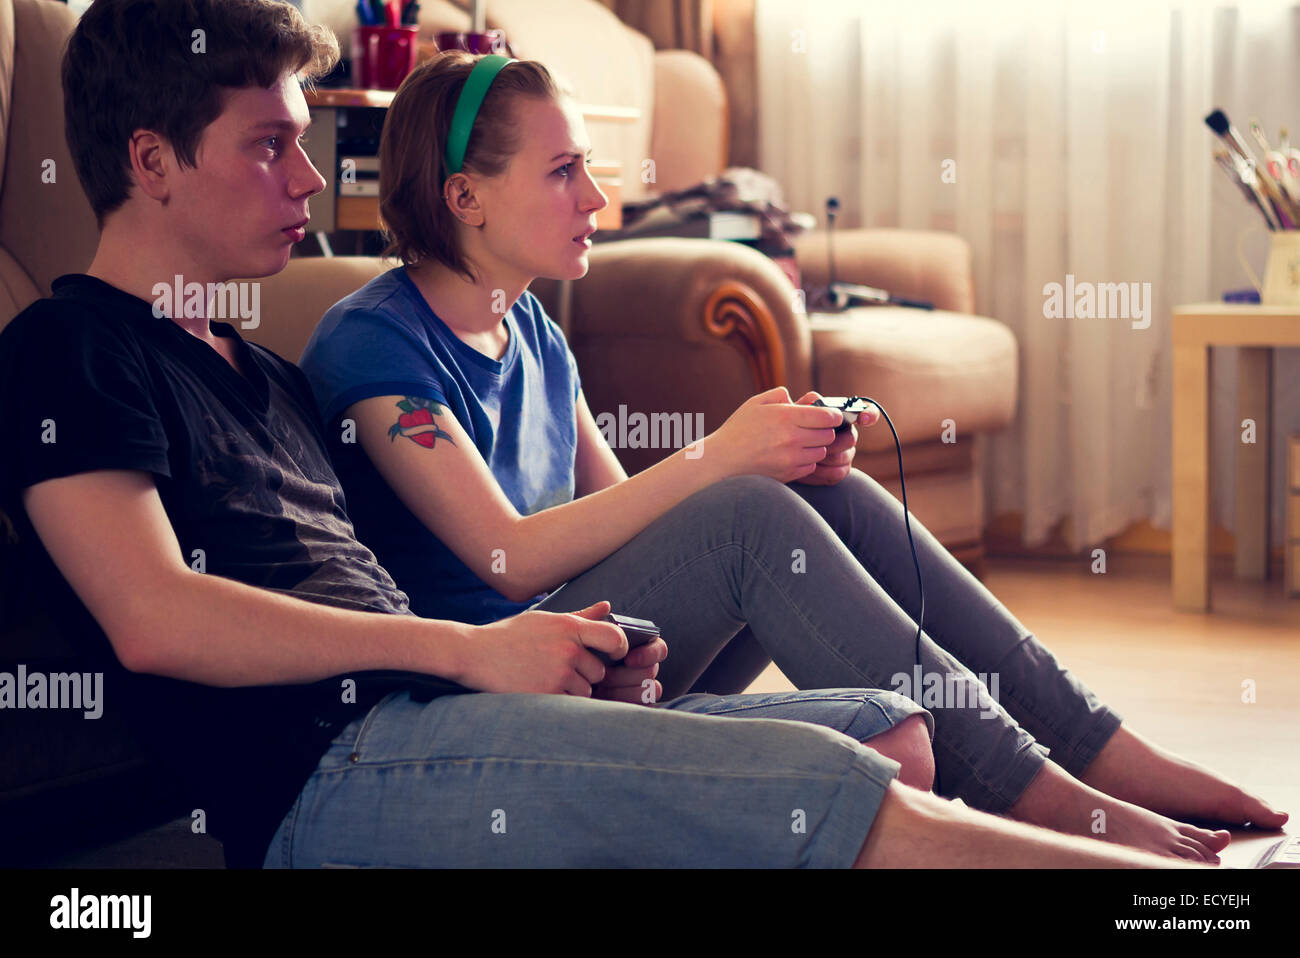 Couple playing video games on living room floor Stock Photo